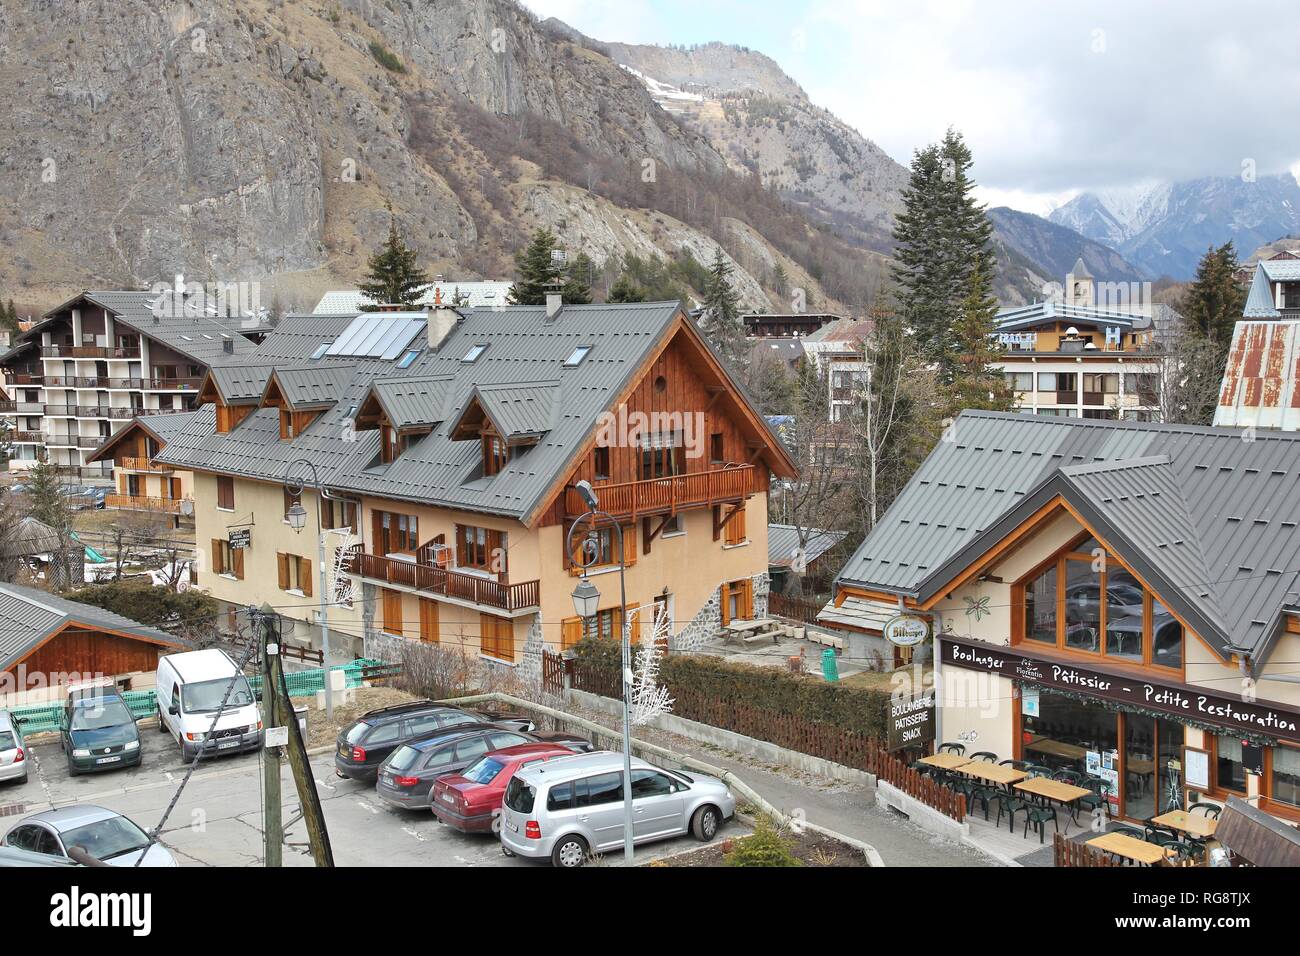 VALLOIRE, FRANCE - MARCH 27, 2015: Ski resort town of Valloire in France. The skiing station here has 150km of ski runs. Stock Photo